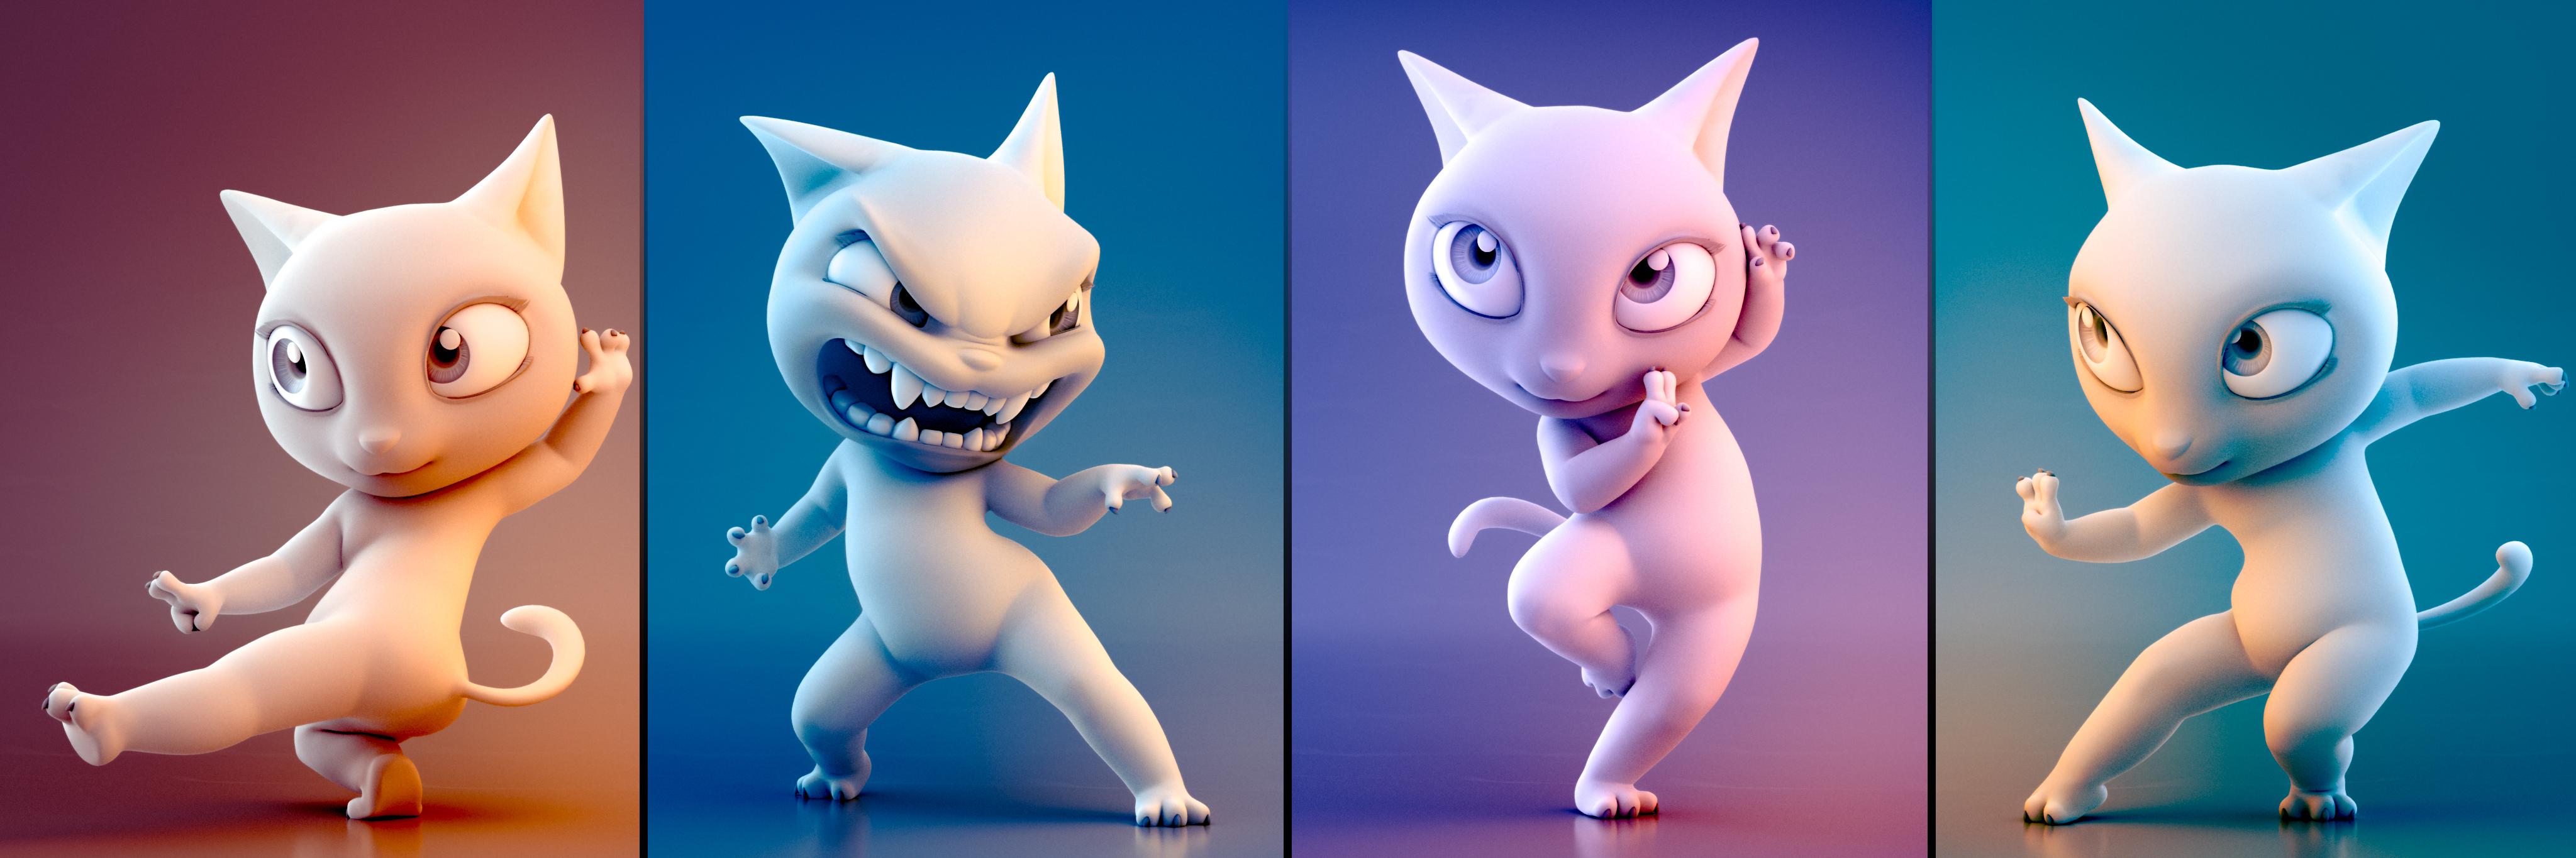 Four photos of cat character from GDC 2023 “Simulating film-quality characters in games” session demonstrating varied poses and with varied expressions